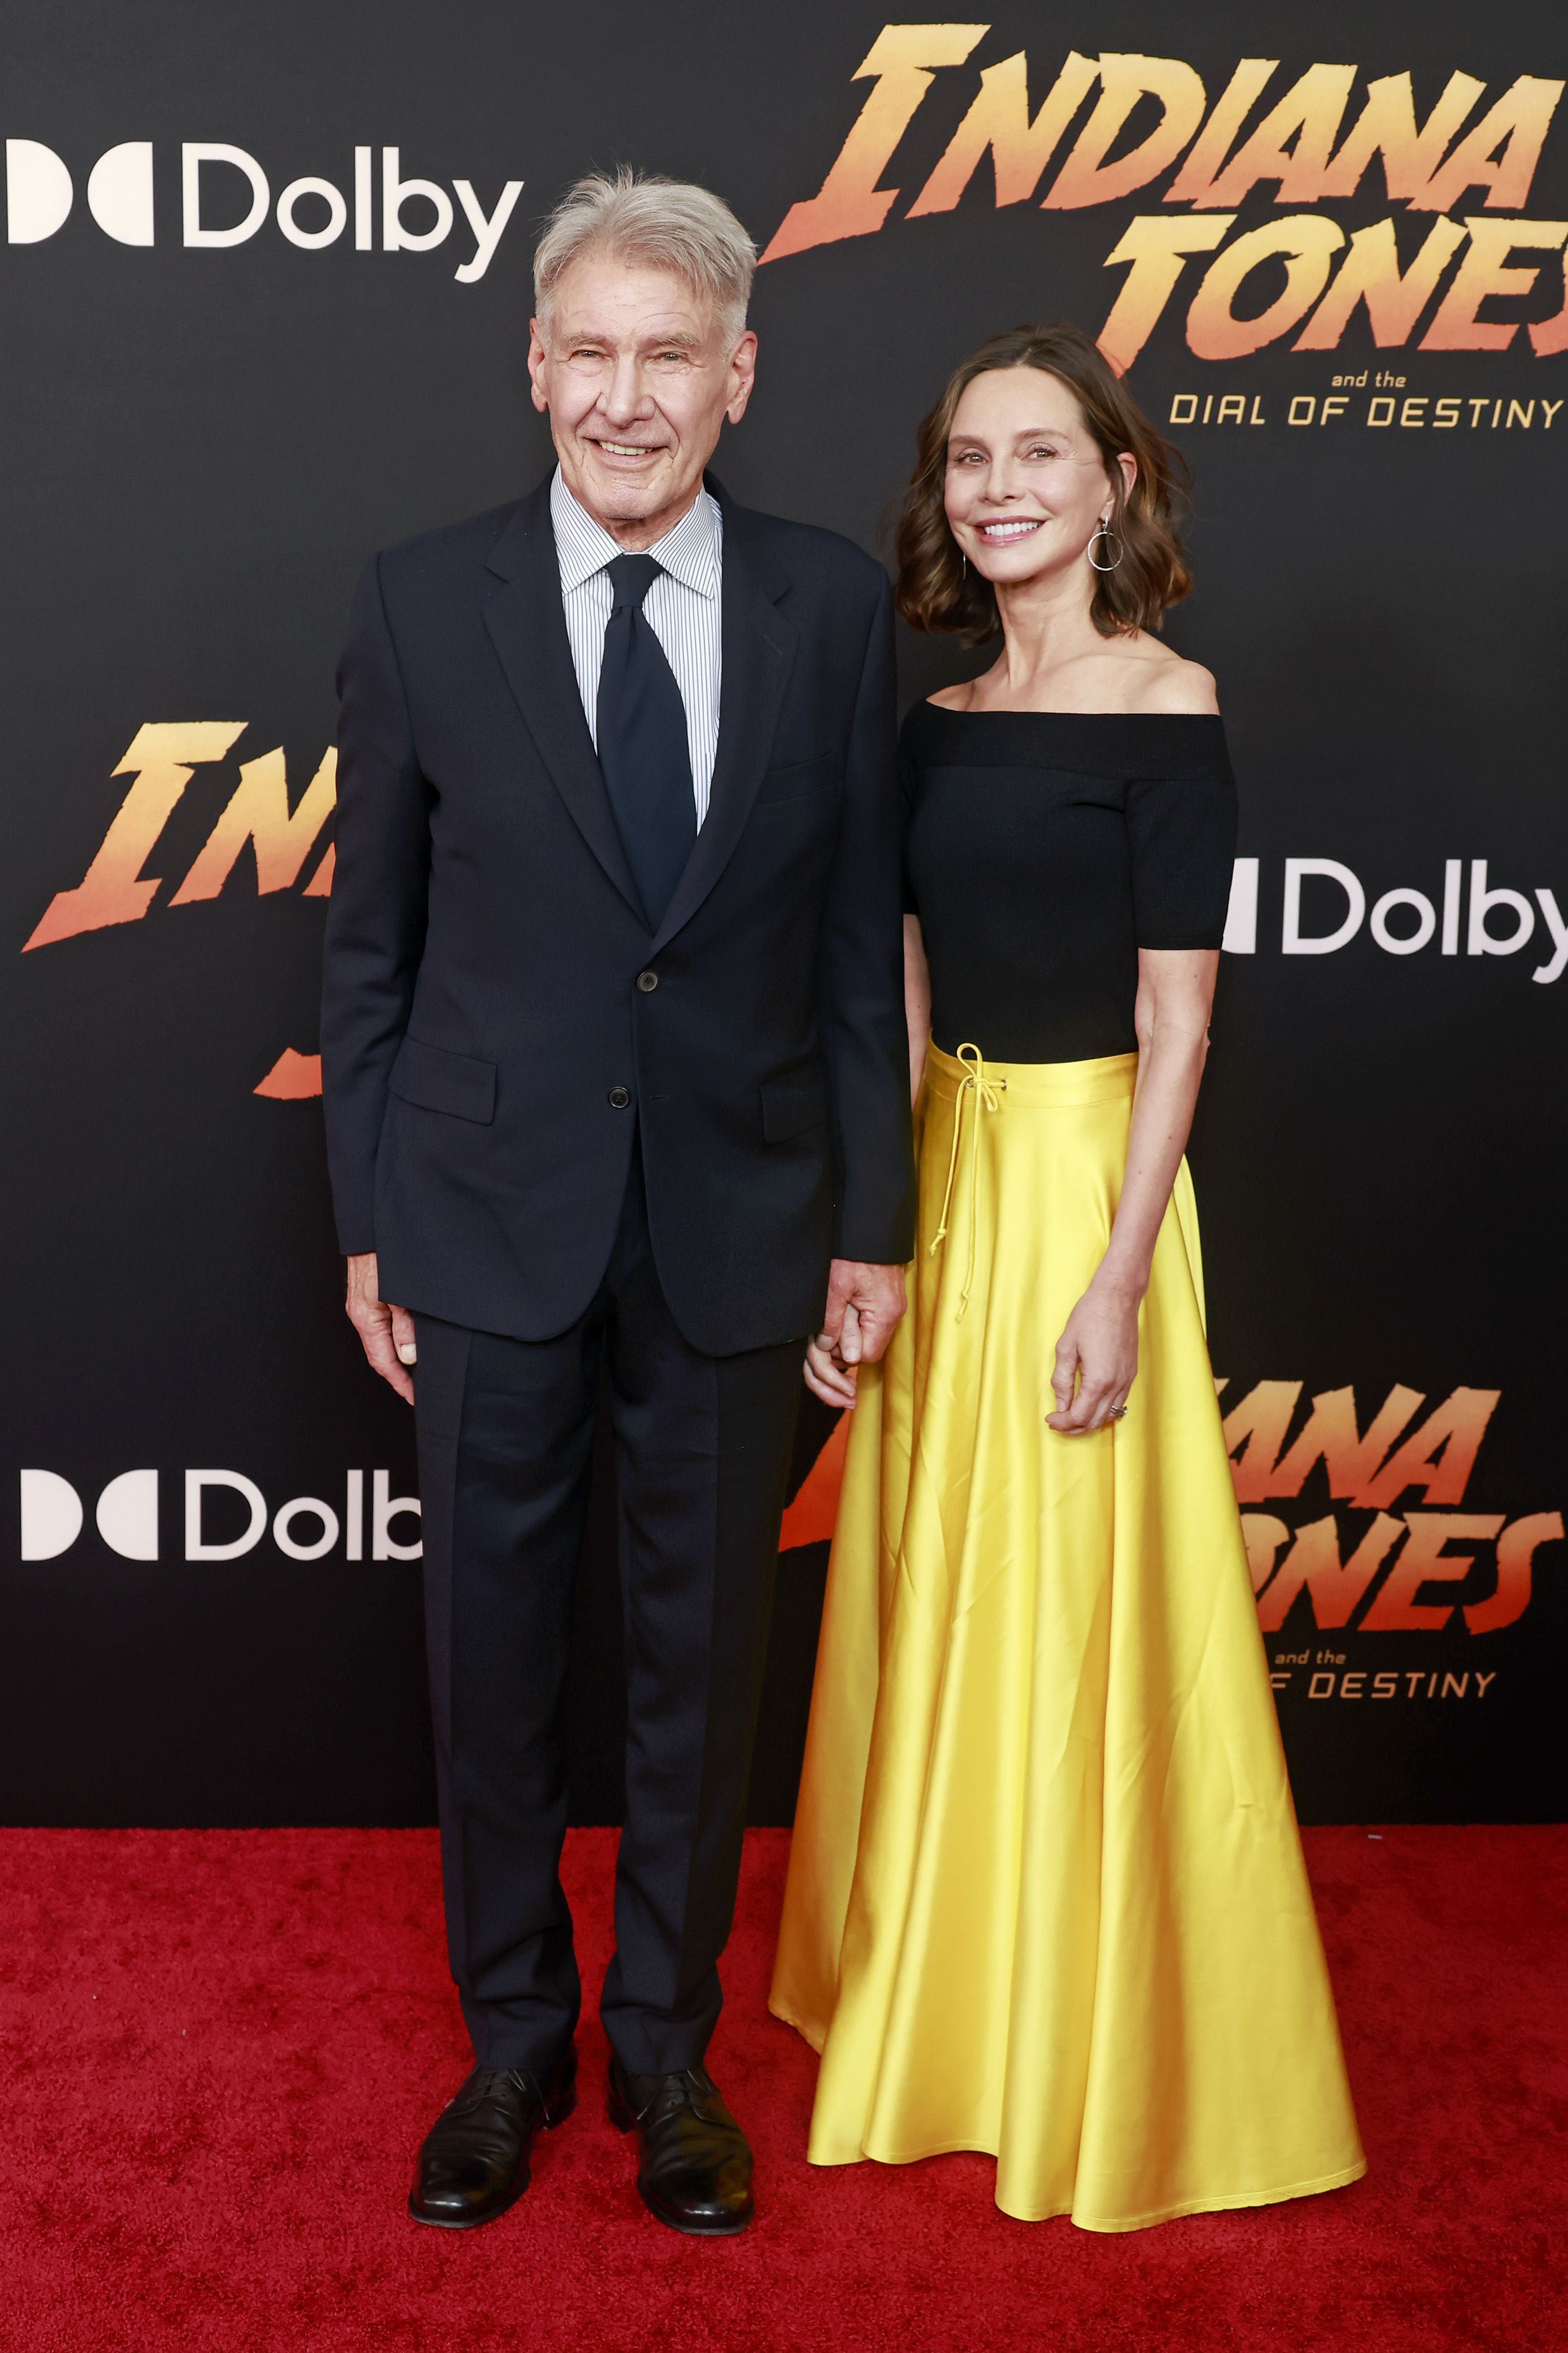 Harrison Ford and Calista Flockhart attend the Los Angeles Premiere of LucasFilms' "Indiana Jones And The Dial Of Destiny" at Dolby Theatre on June 14, 2023 in Hollywood, California. | Source: Getty Images